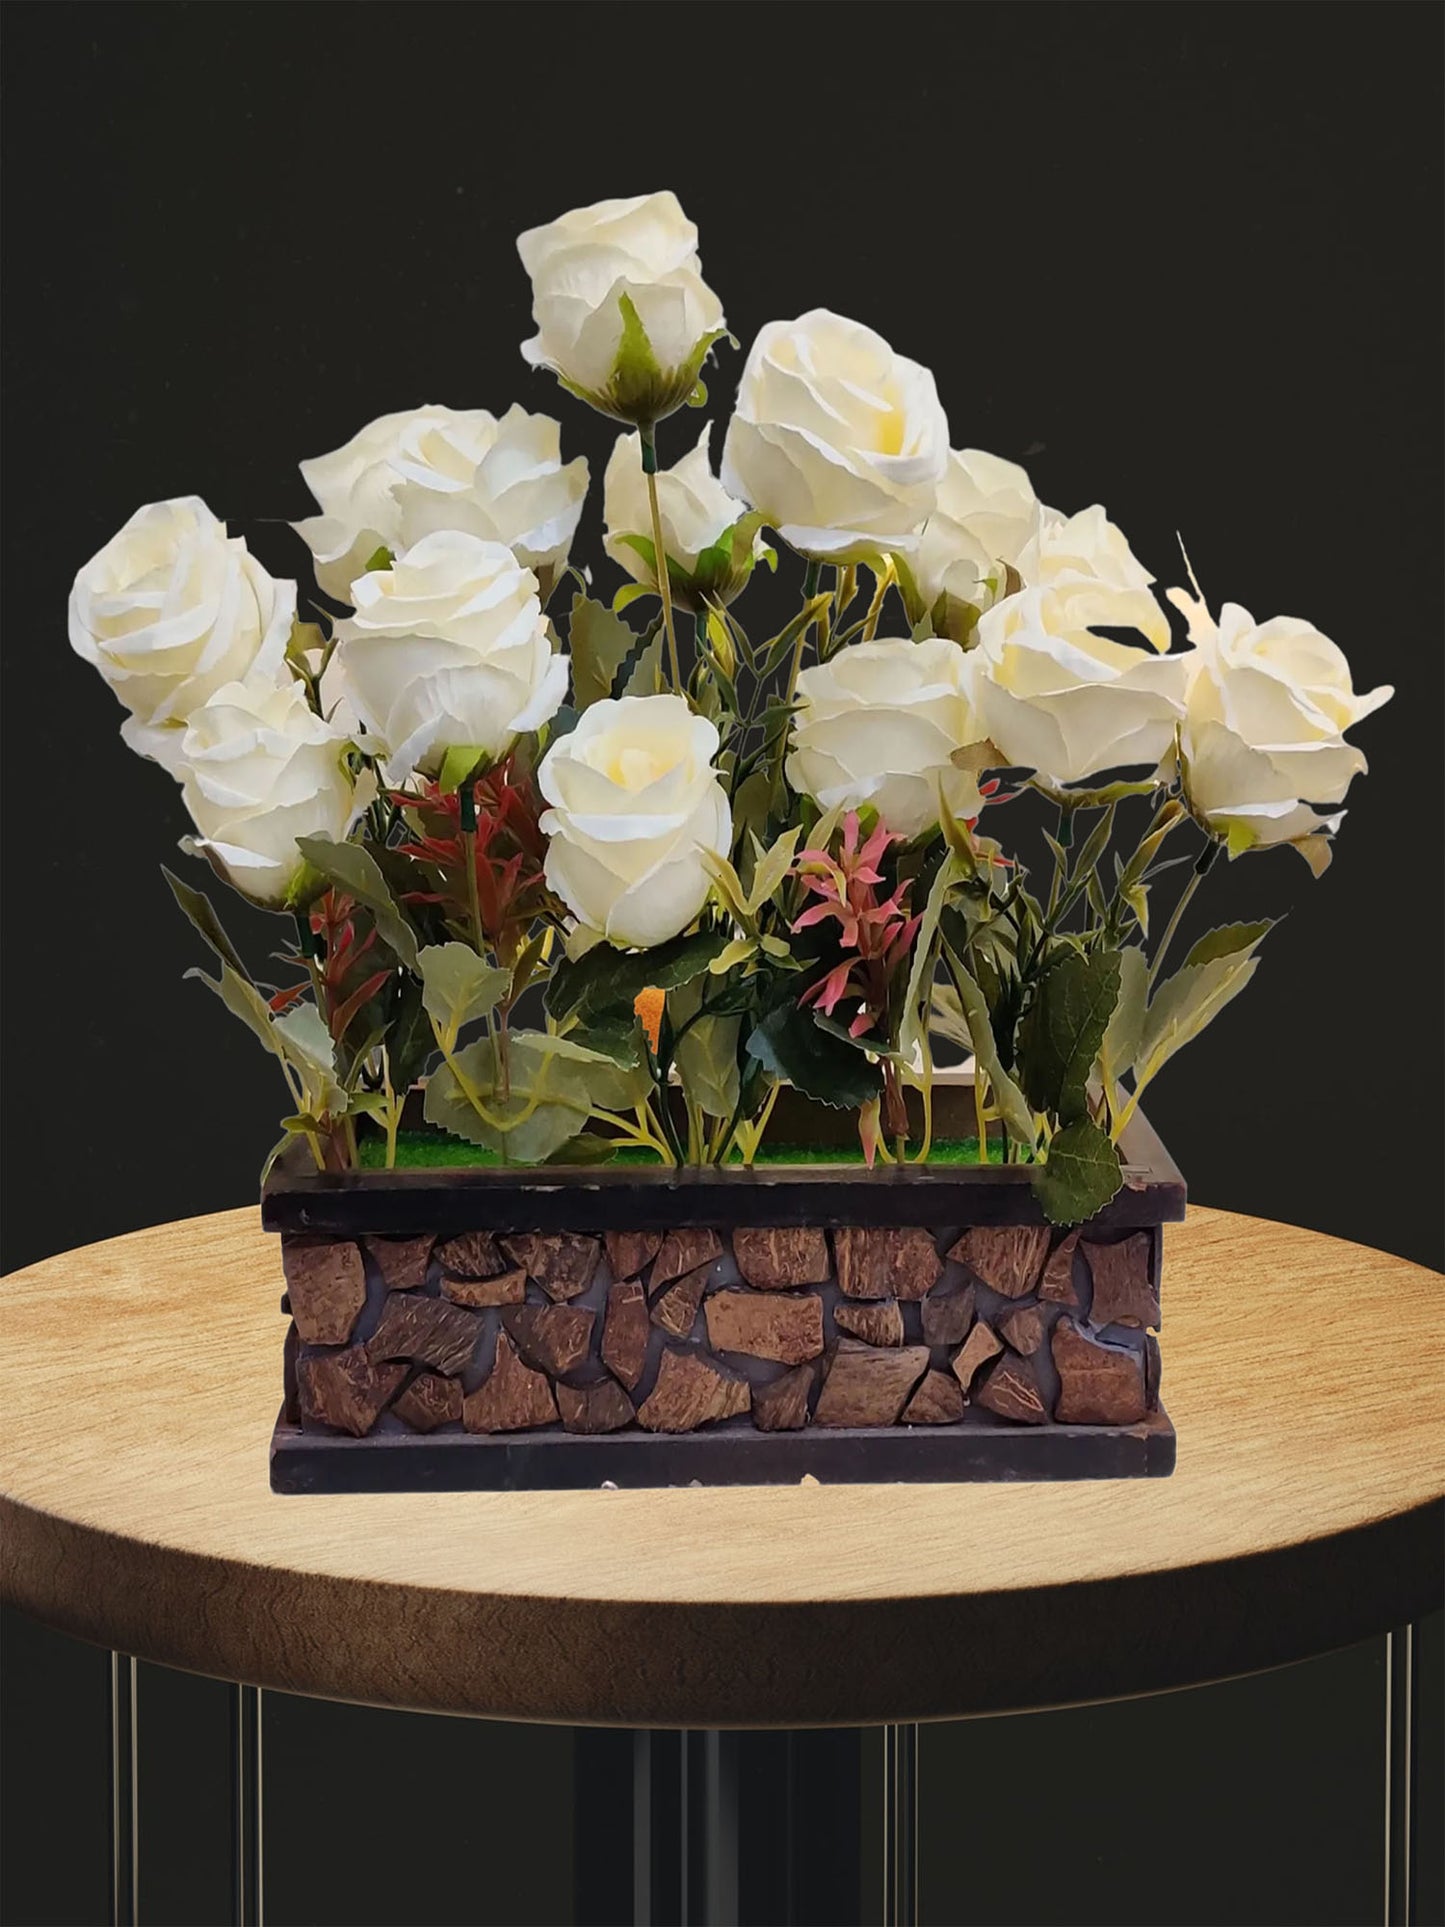 Elegant Artificial Flowers in Decorative Pot: Lifelike Beauty for Any Space